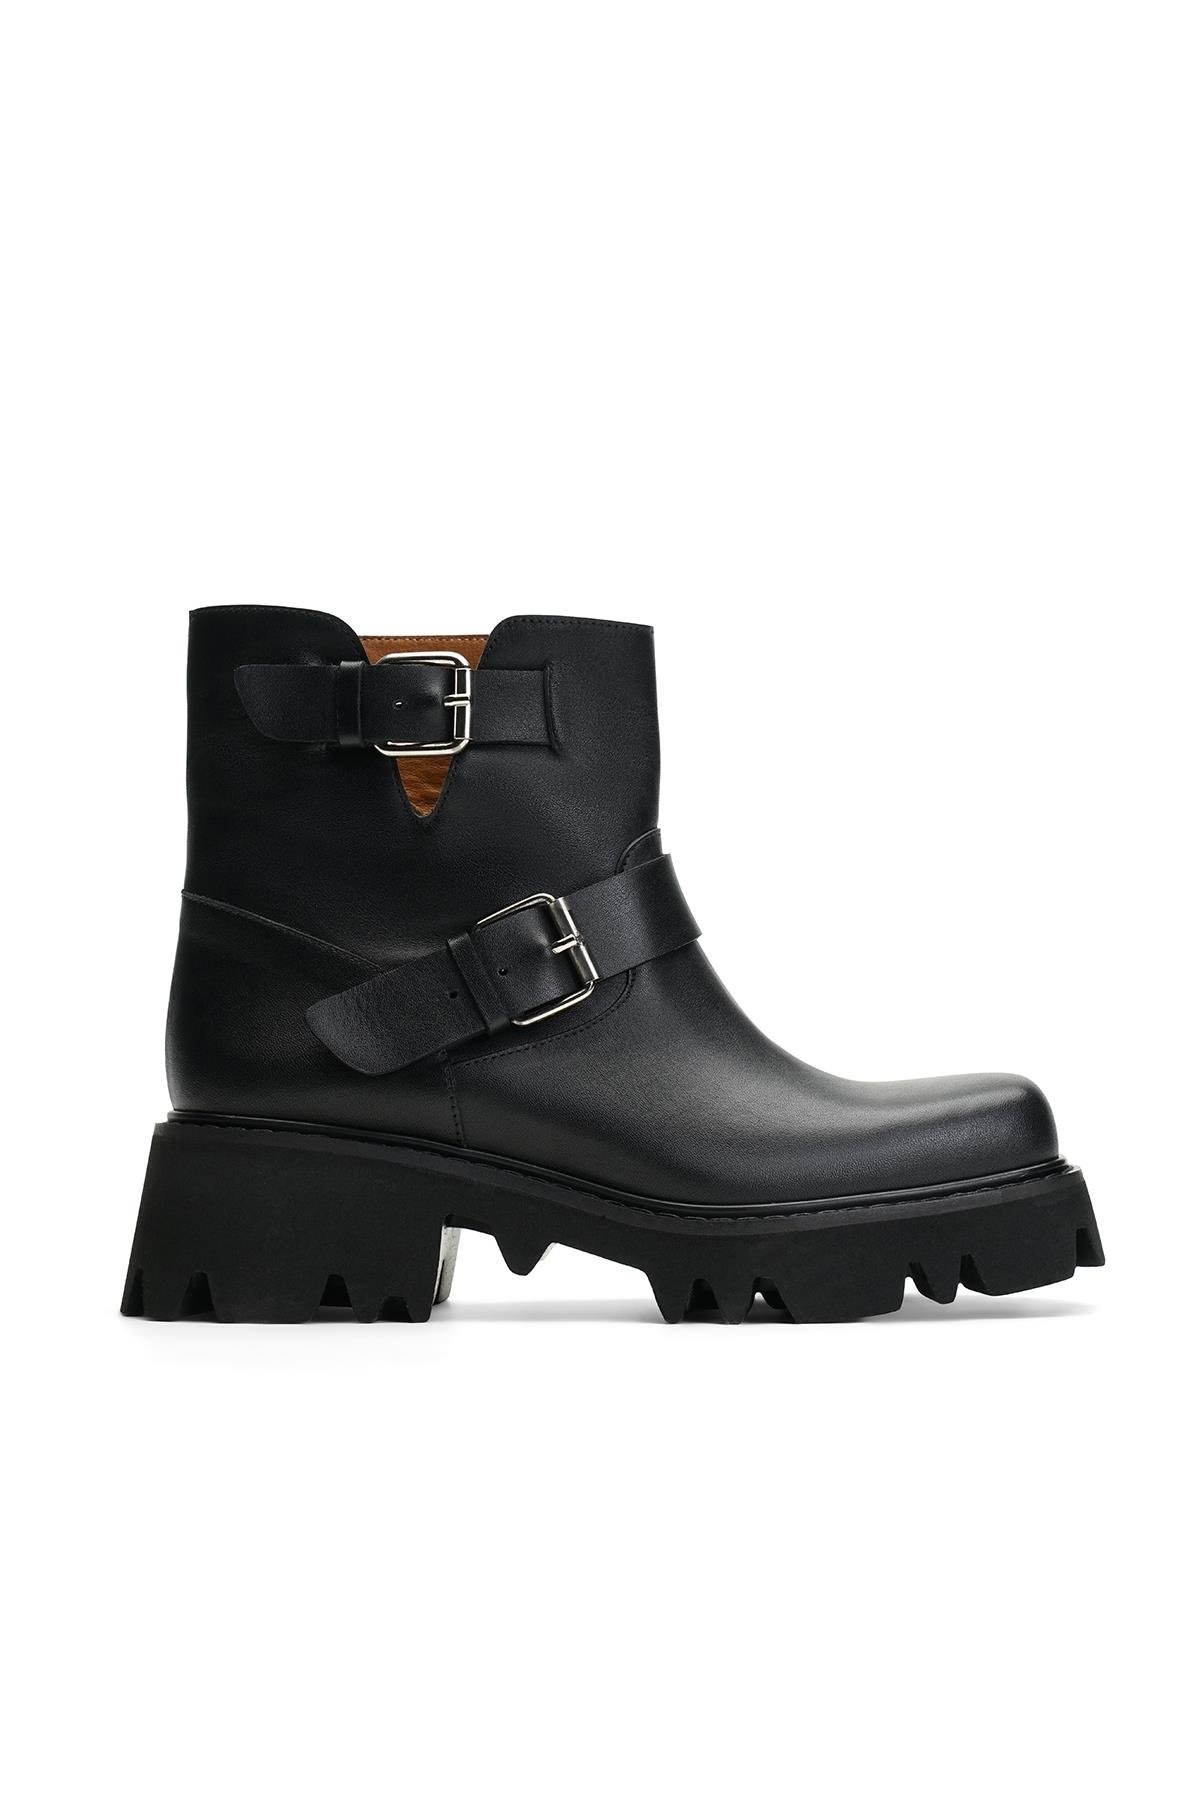 Jabotter Fealty Black Leather Boots